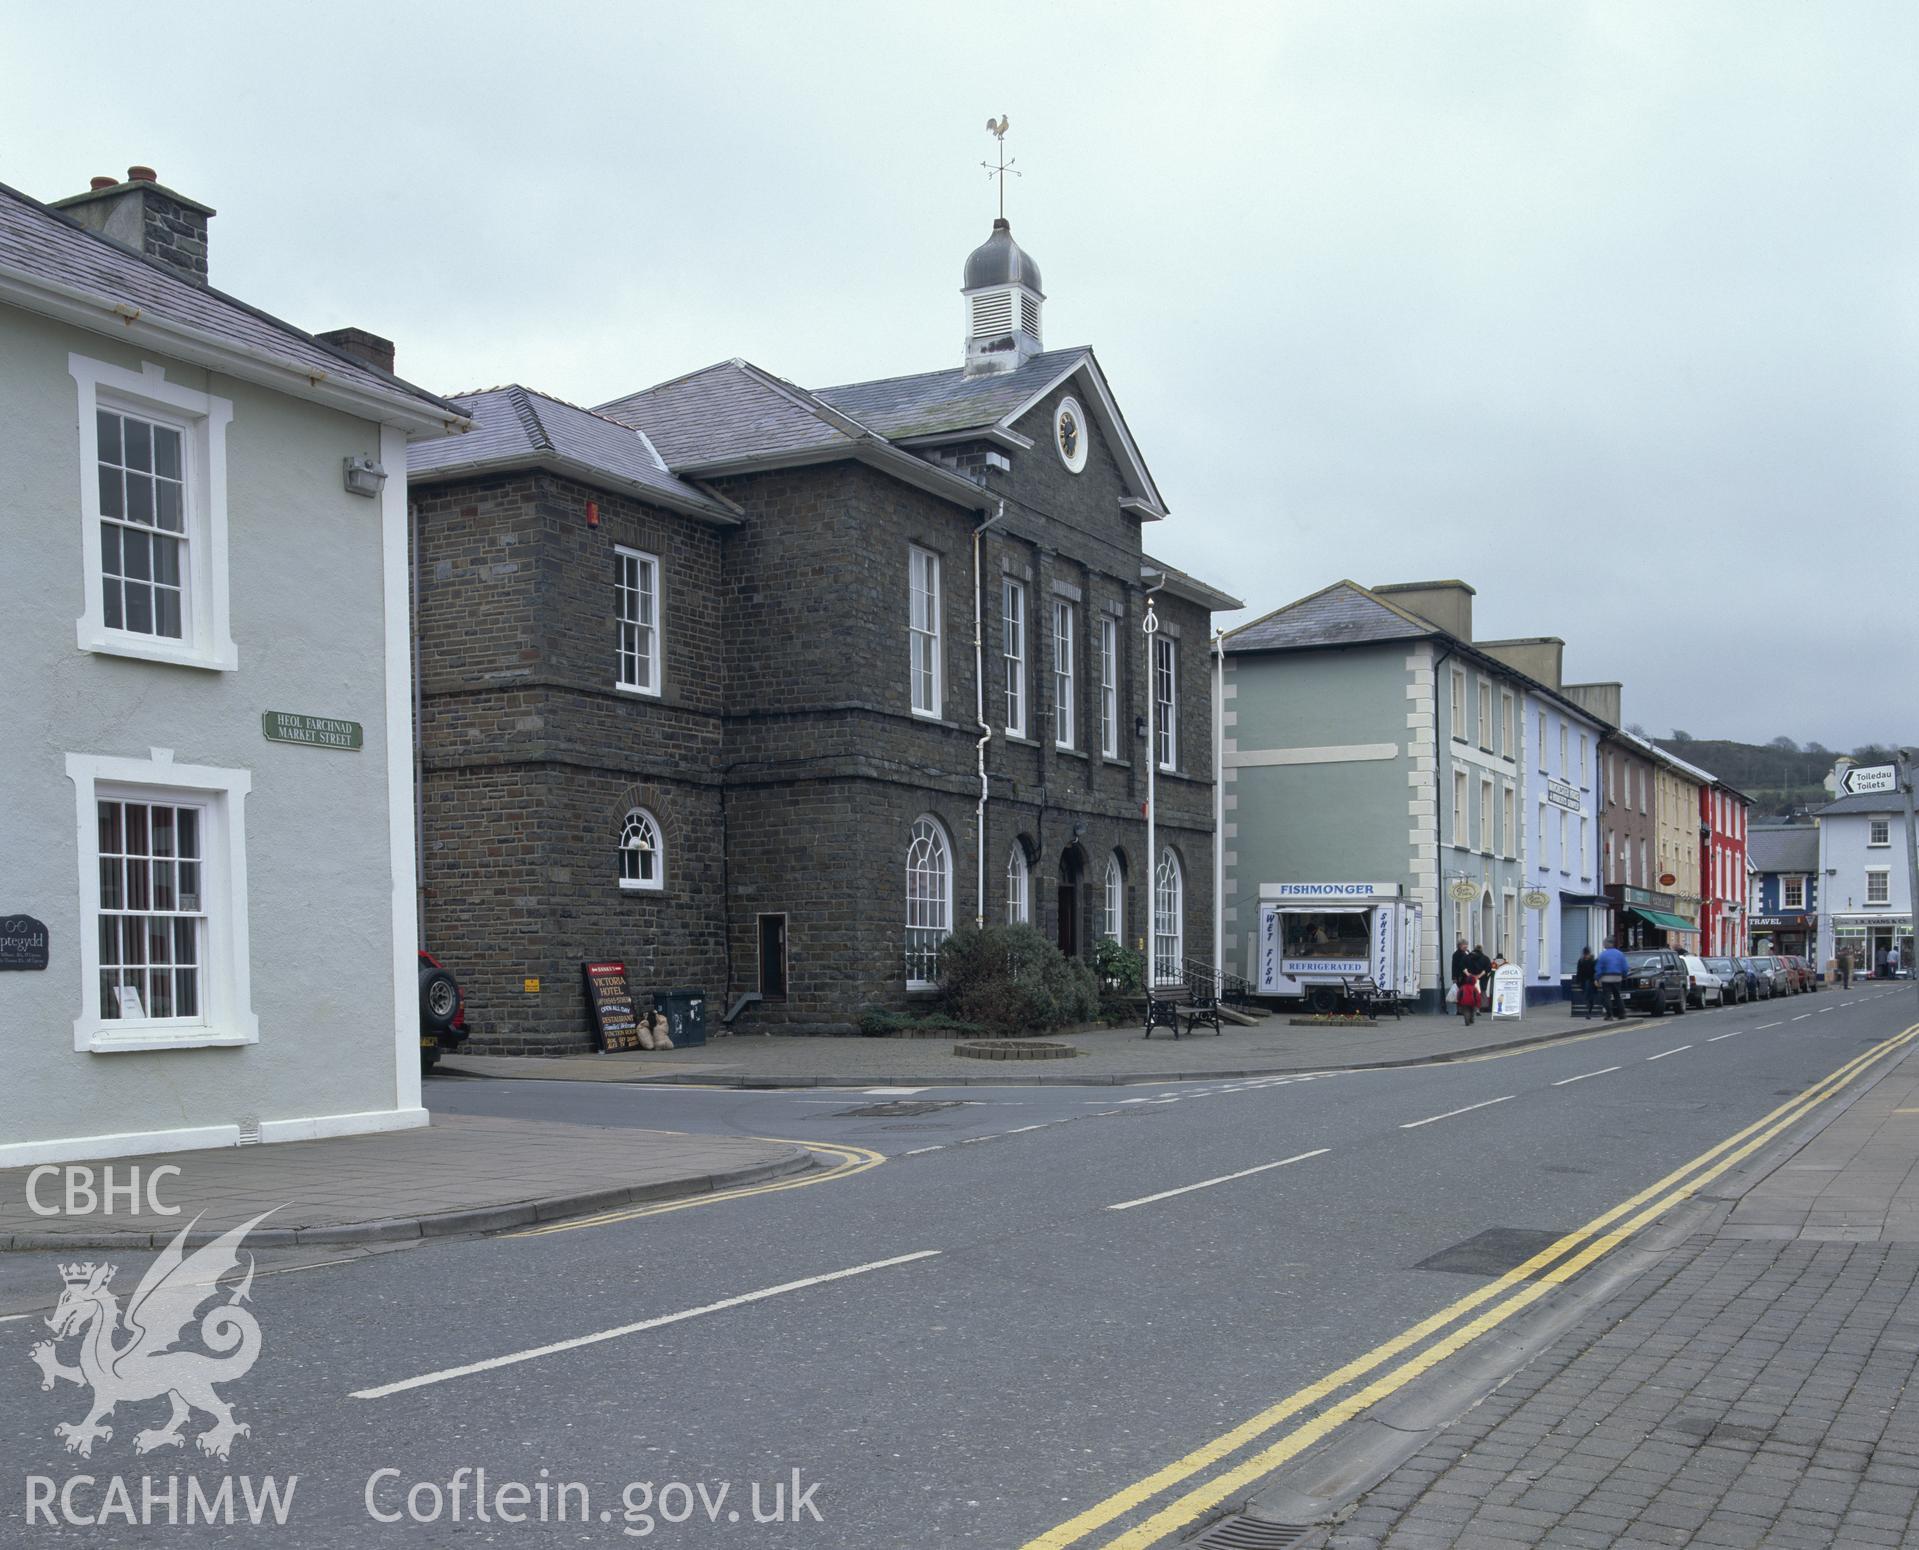 RCAHMW colour transparency showing exterior view of Town Hall, Aberaeron